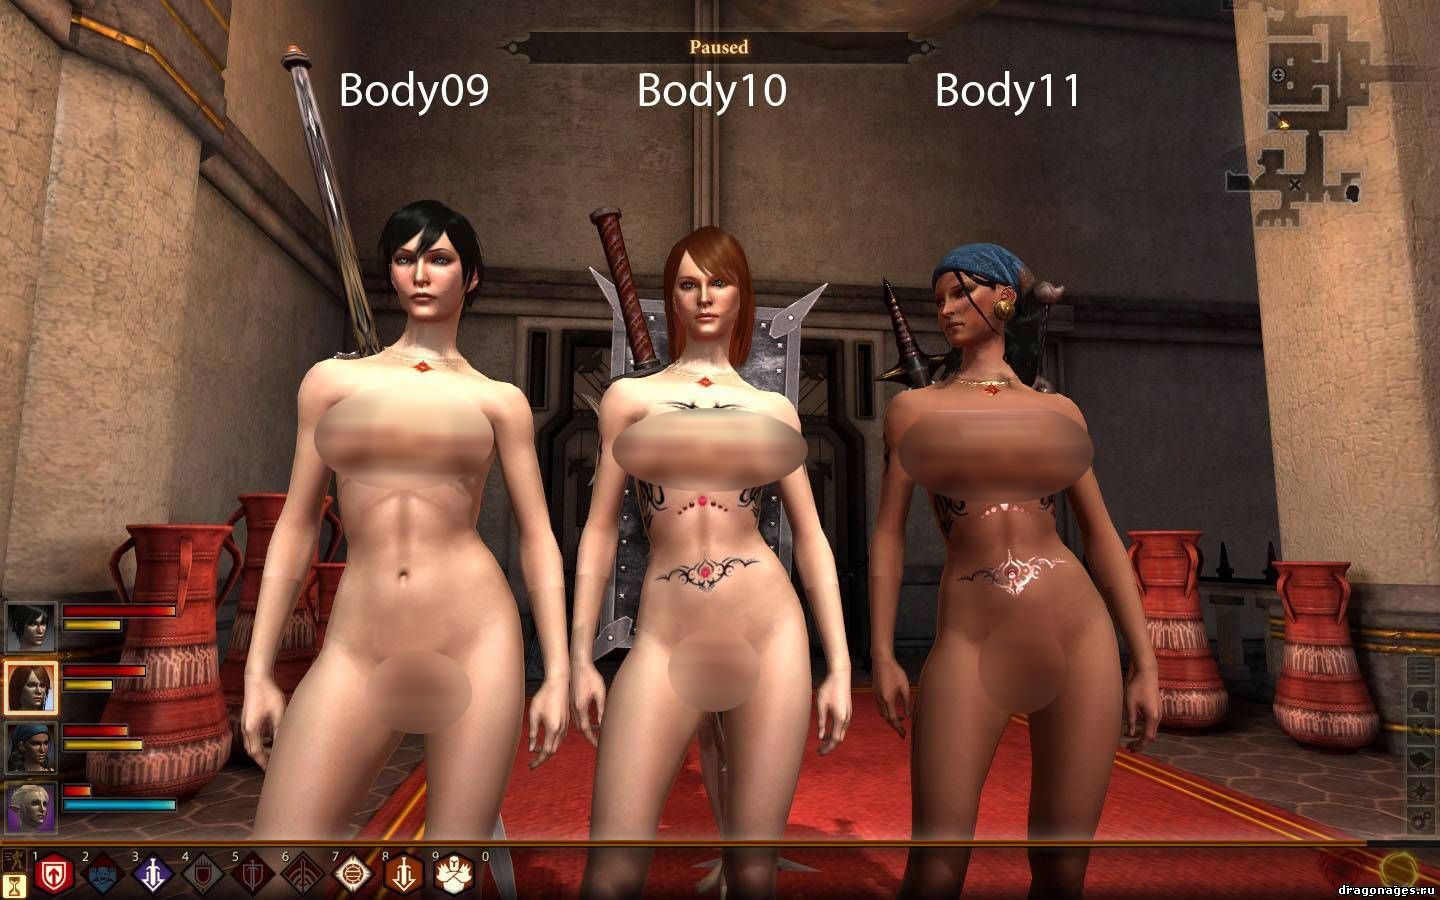 david penney recommends Dragon Age Inquisition Nude Mods